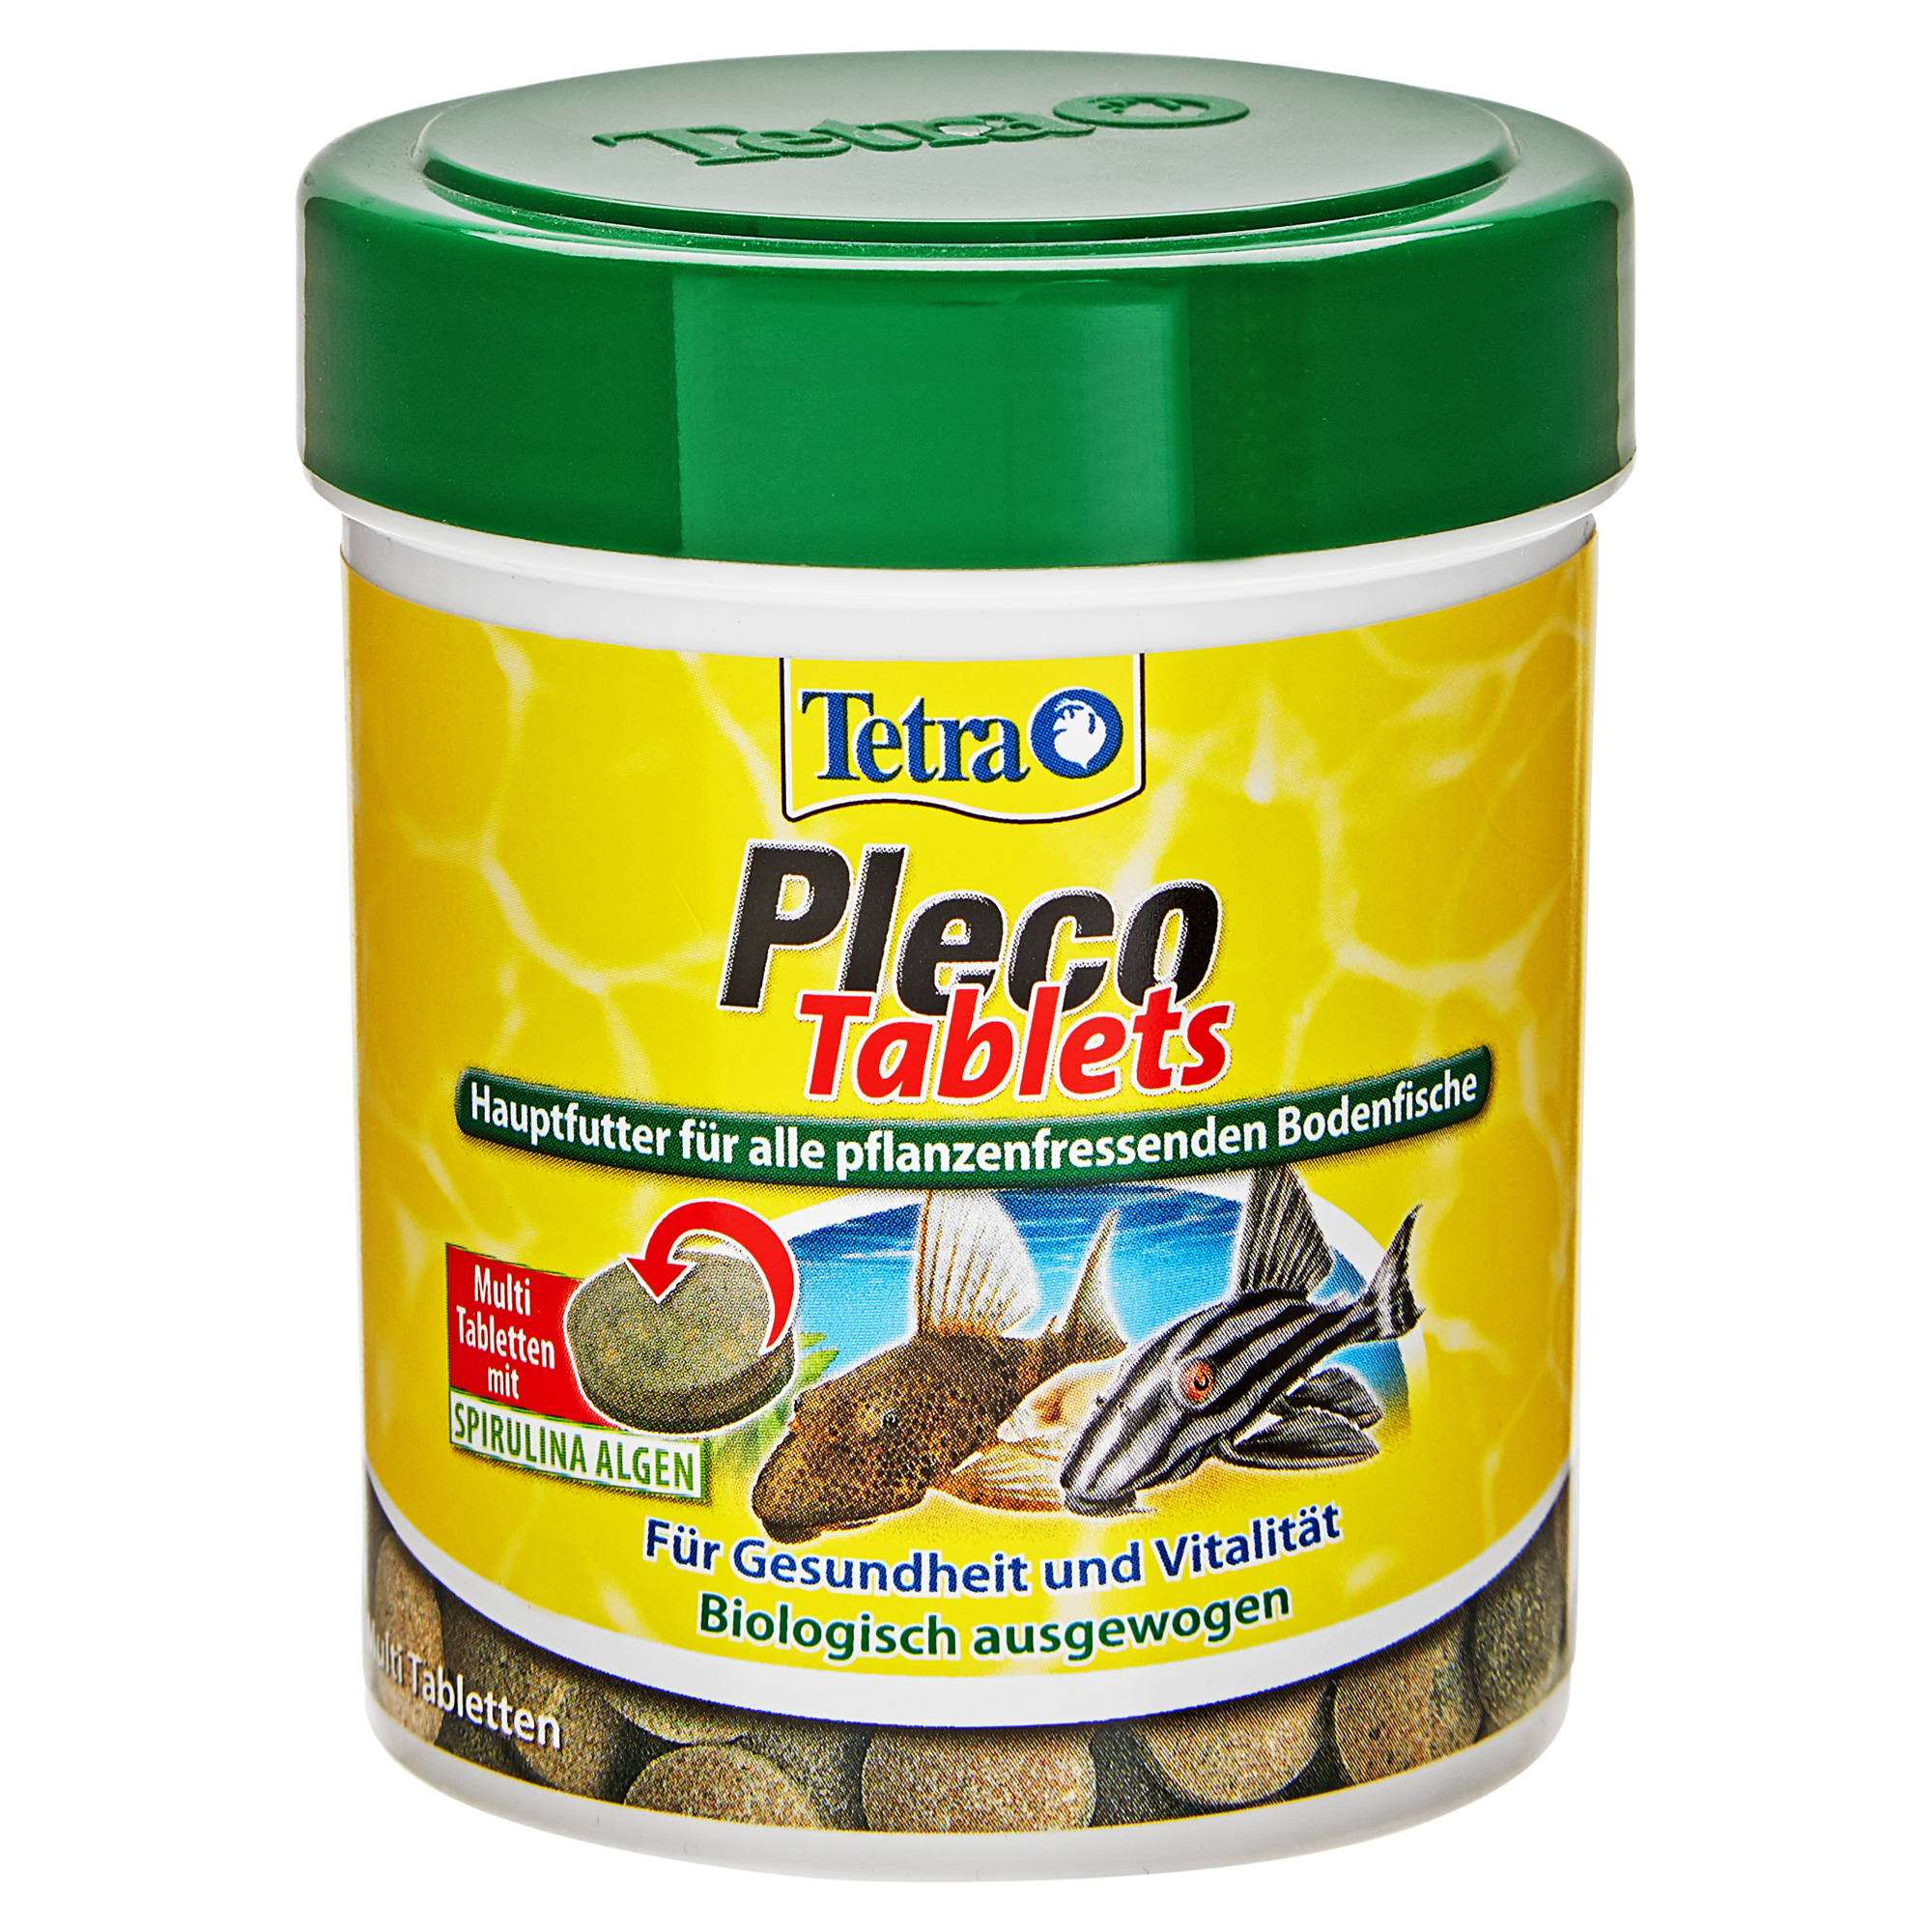 Fischfutter-Tablets "Pleco" 85 g + product picture